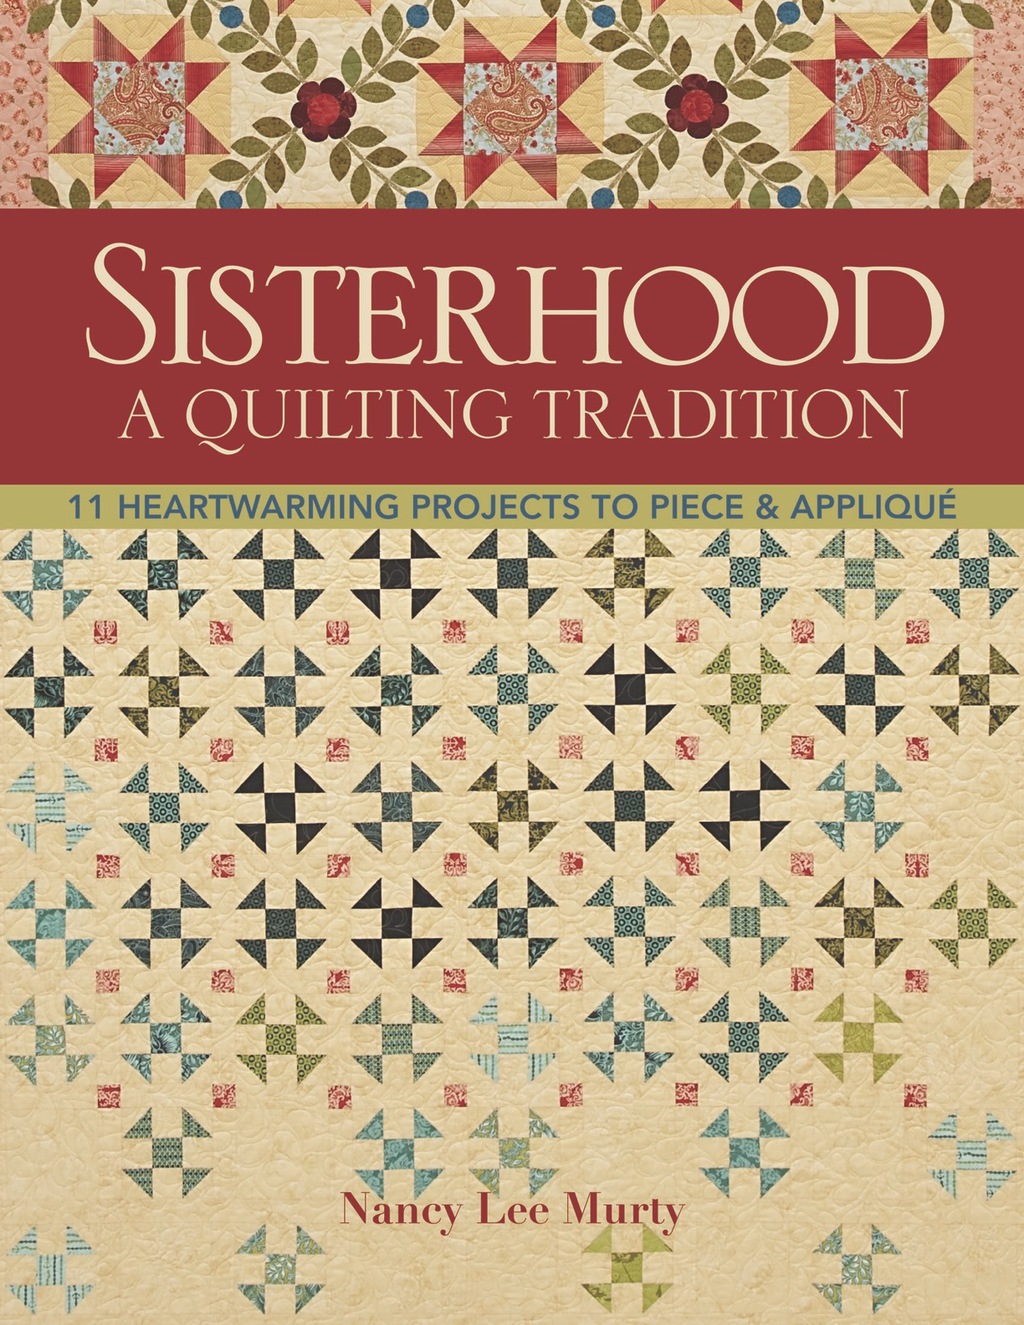 Sisterhood-A Quilting Tradition: 11 Heartwarming Projects to Piece & Applique (eBook) - Nancy Lee Murty,